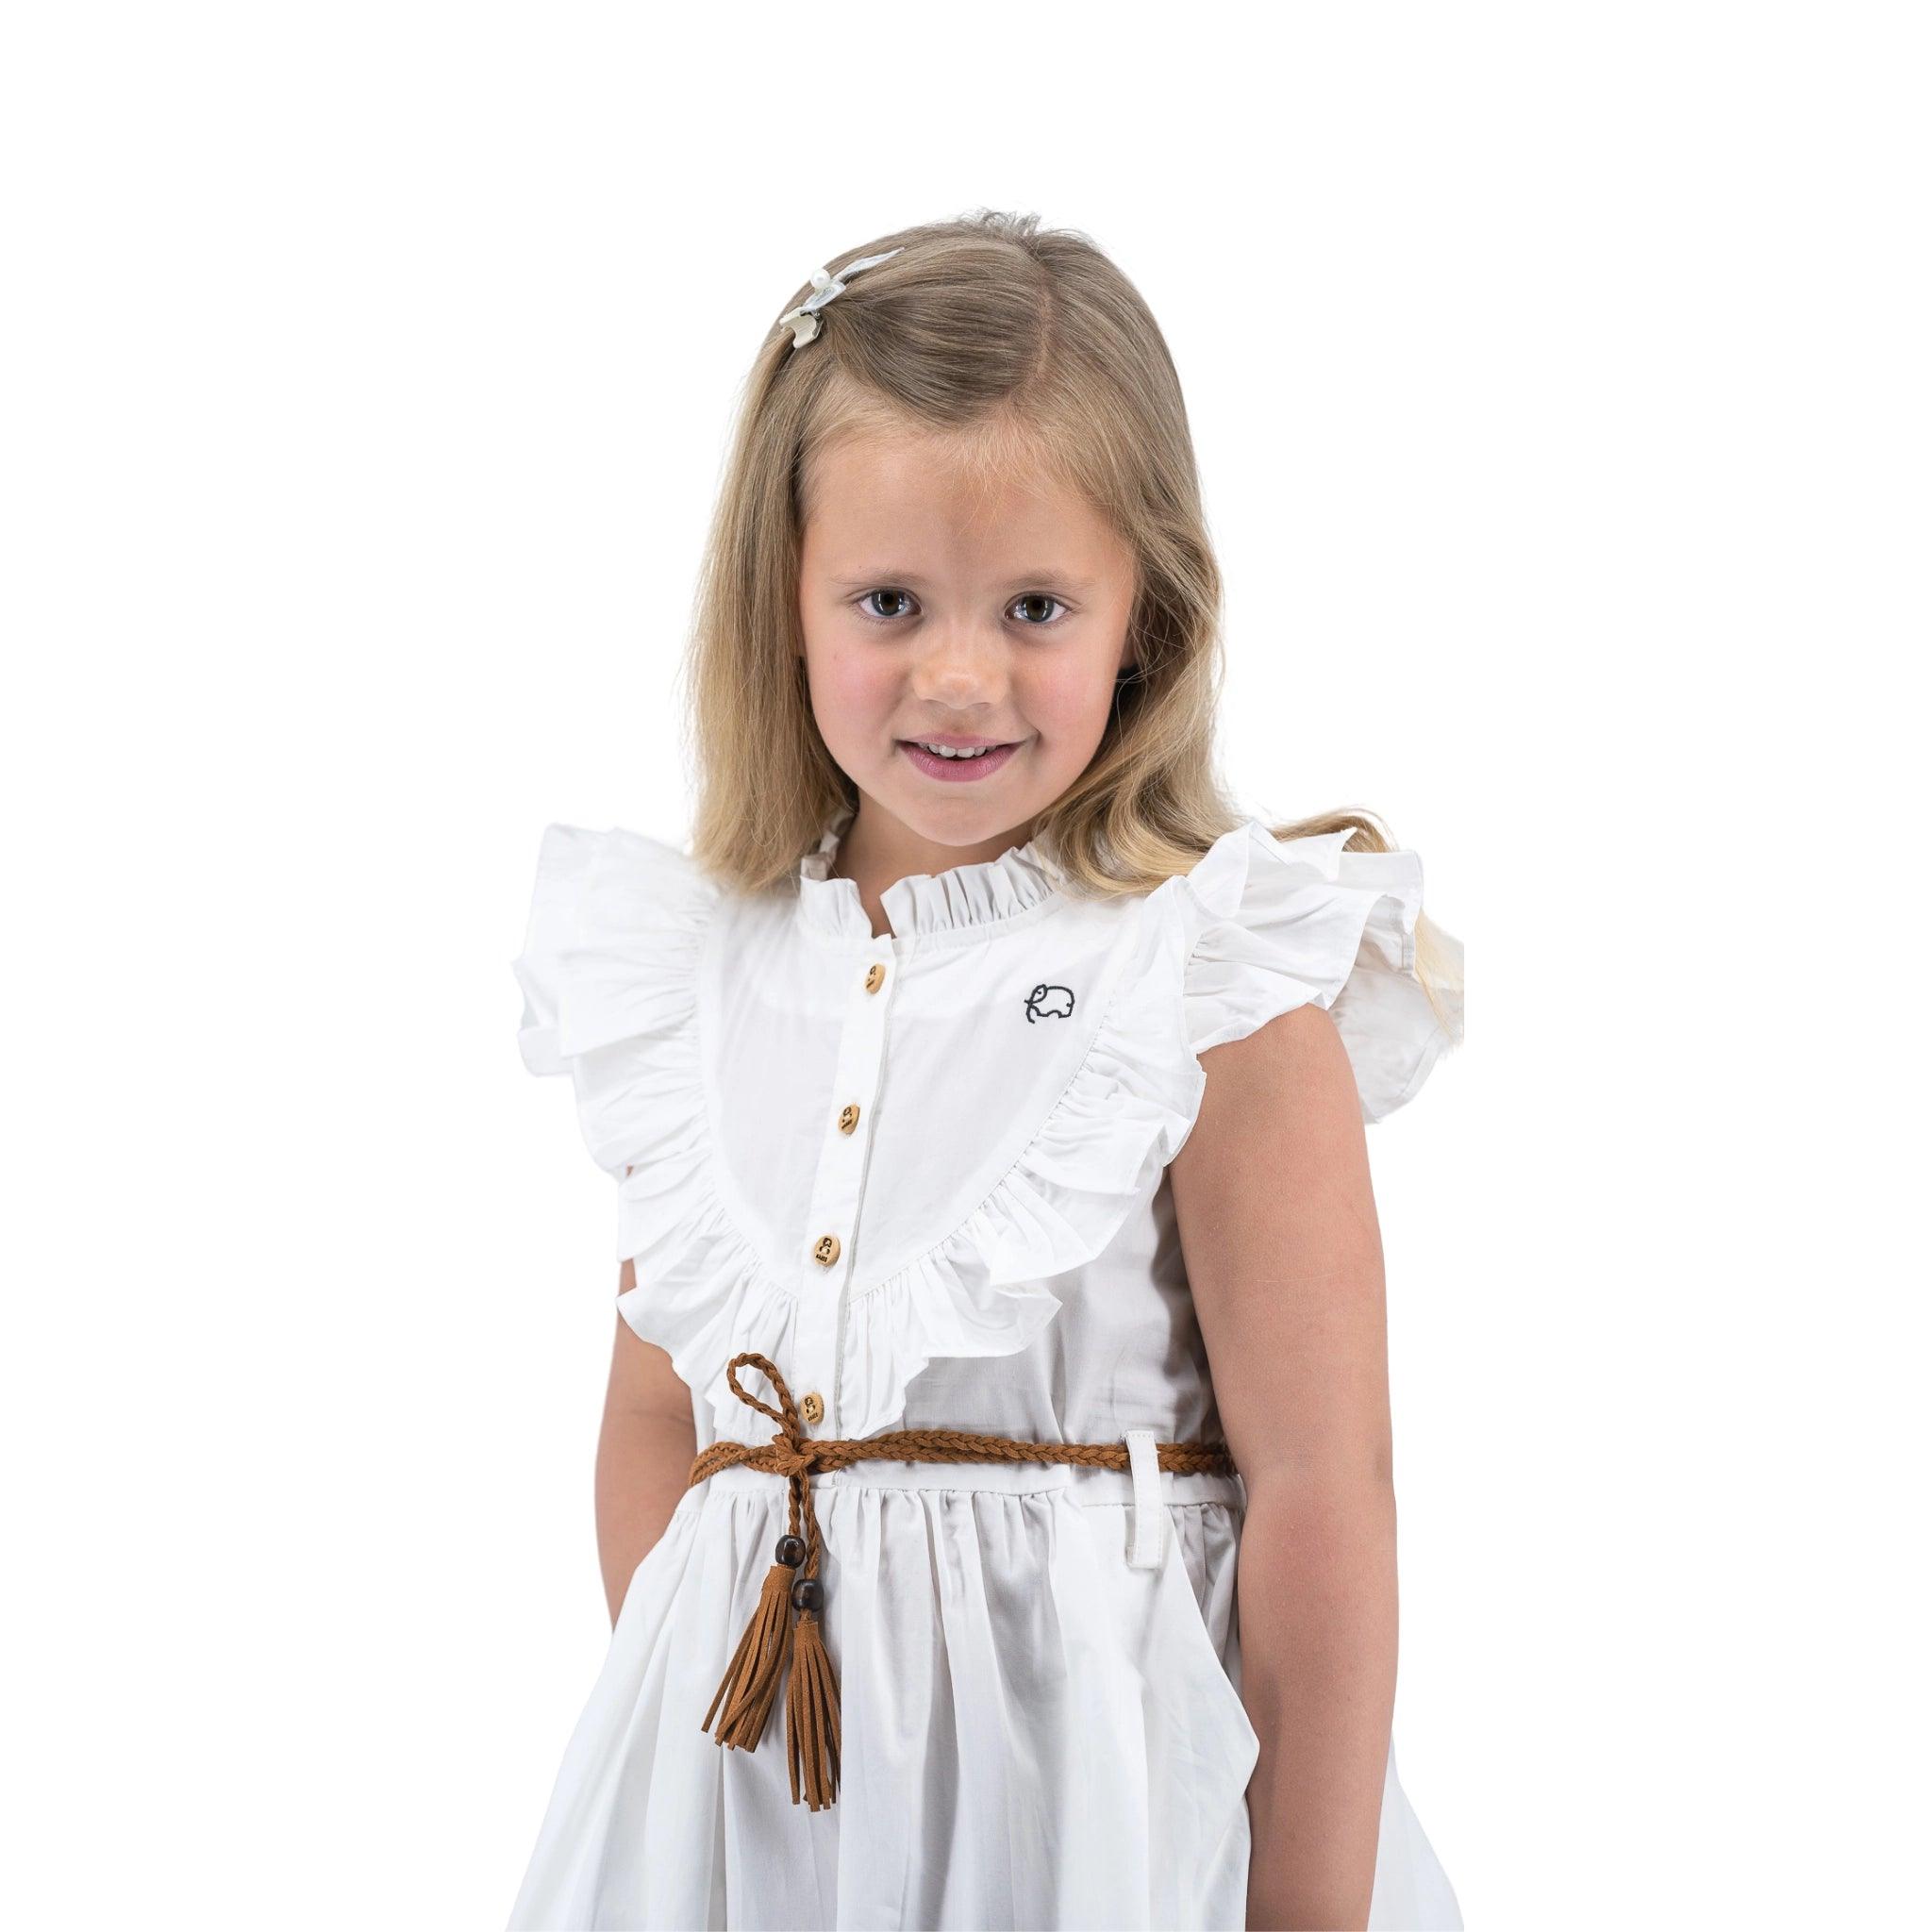 Young girl with blond hair wearing a Karee white butterfly sleeve cotton dress and a small bow clip, smiling slightly, standing against a white background.